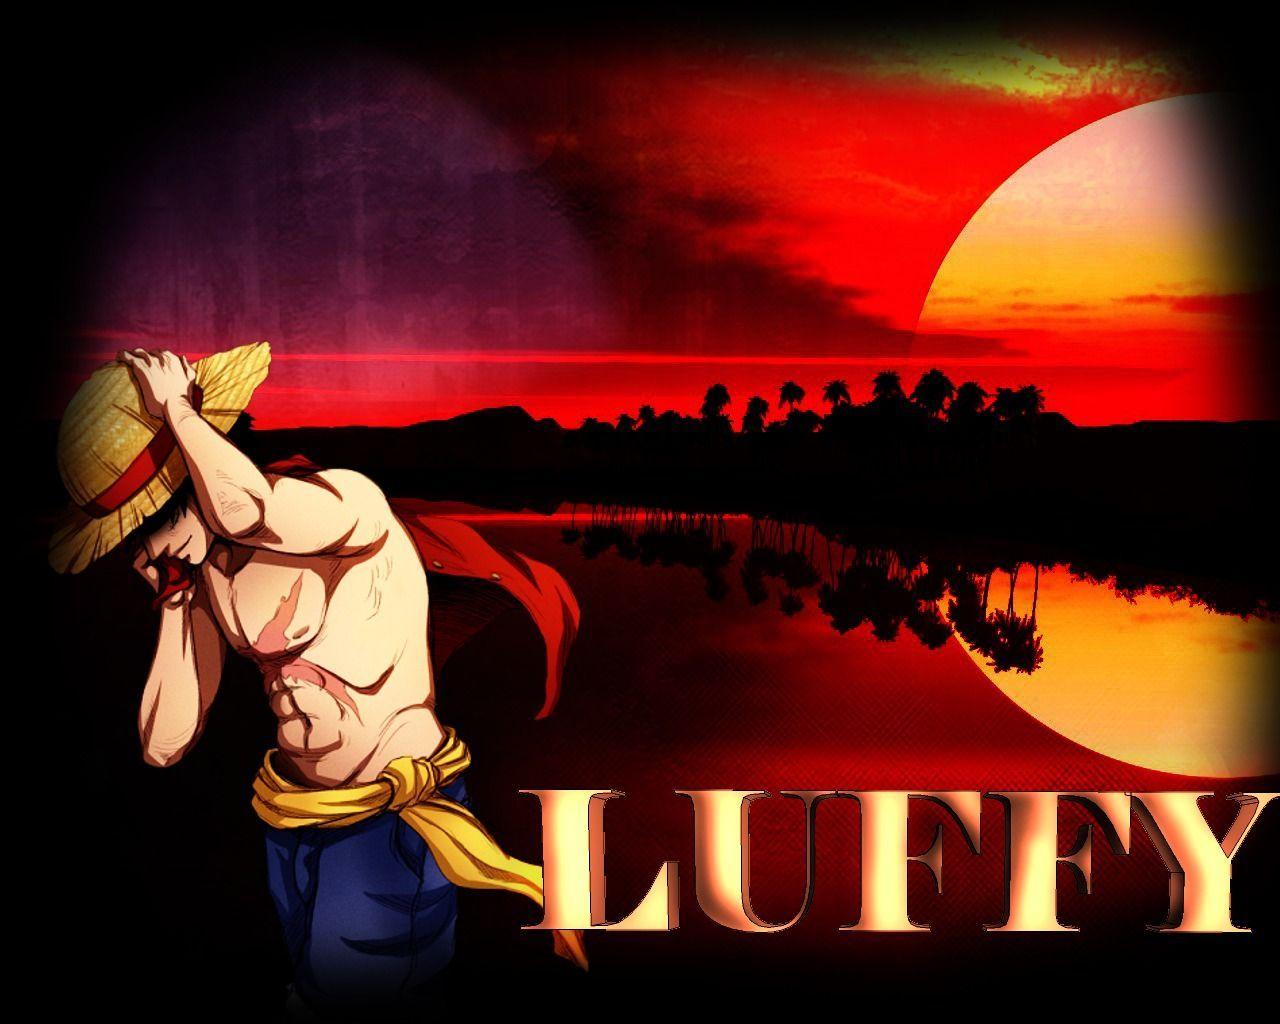 Luffy Wallpapers 1 by MythicxGamer